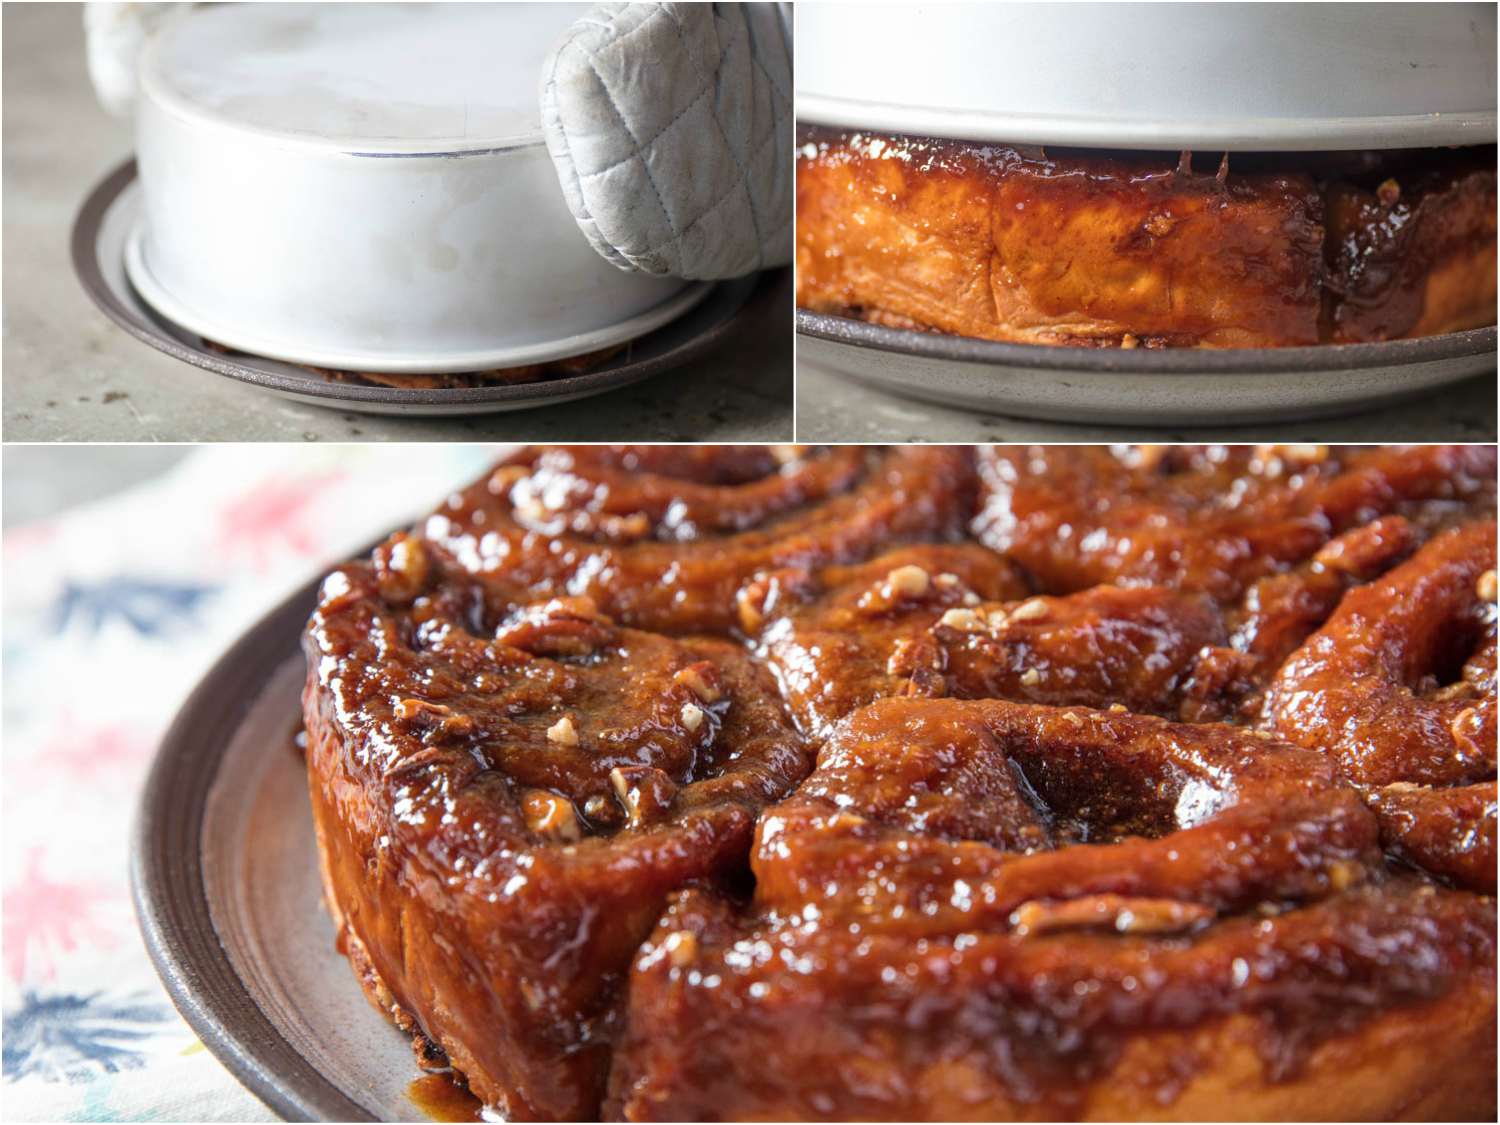 20170914-cinnamon-buns-vicky-wasik-icing-sticky-out-of-pan.jpg